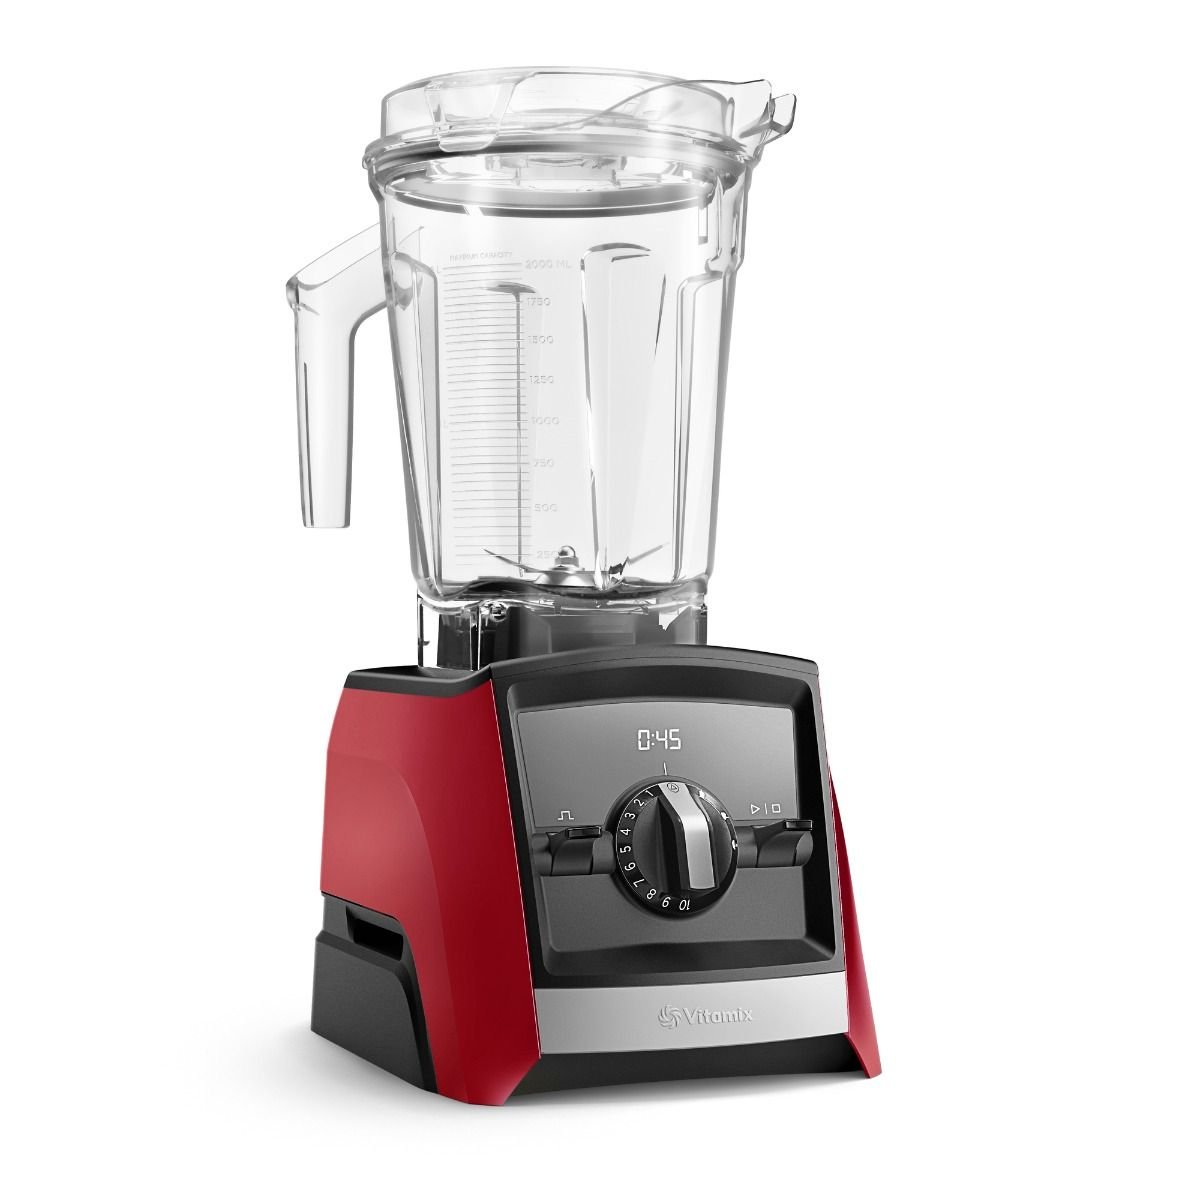 Cold Stone Creamery Milkshake Maker with Stainless Steel Blender Cup Red 